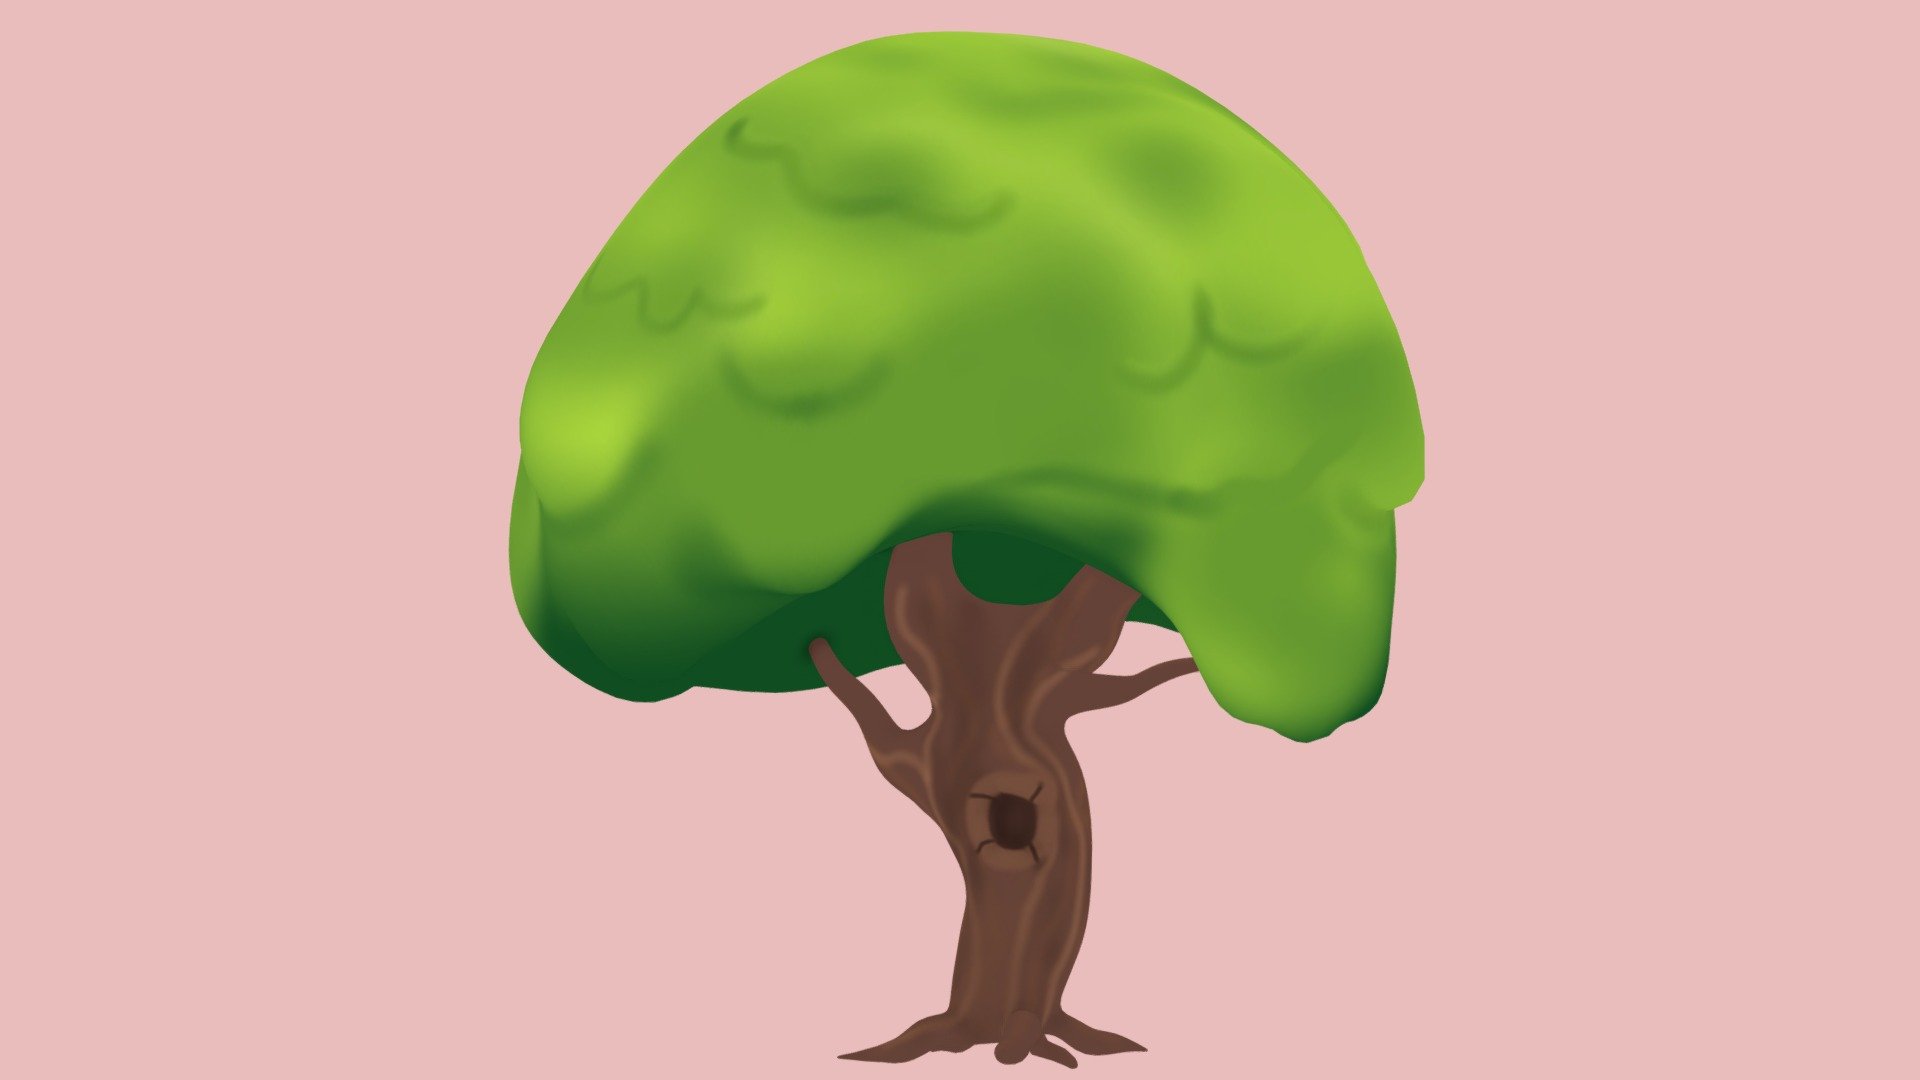 Stylized Toon Tree ready for animation, game or your renderings.
Hand painted textures and low poly 3d model